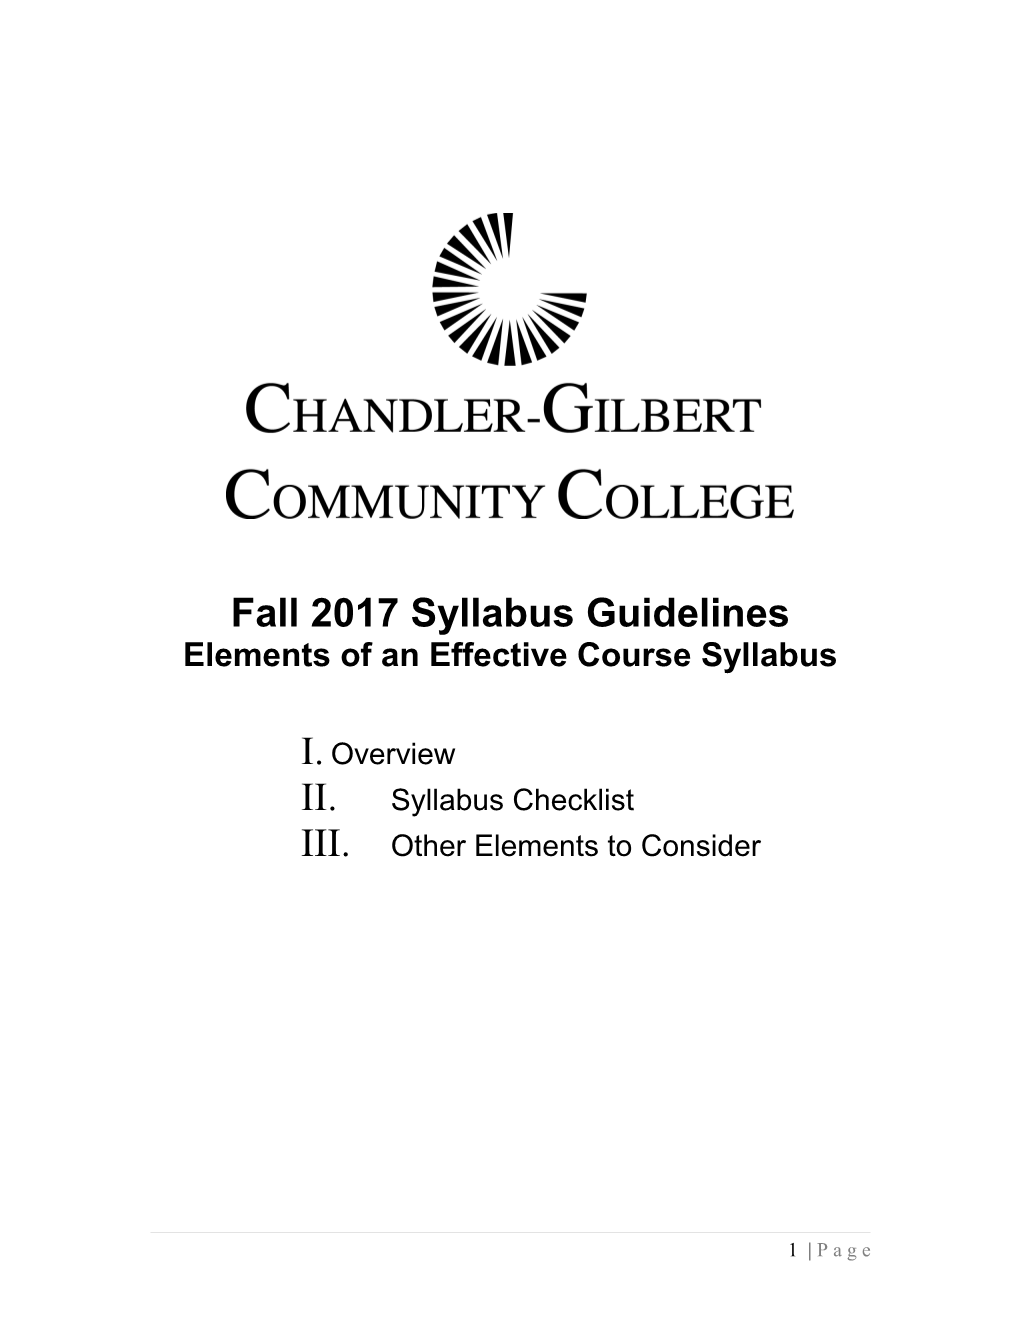 Elements of an Effective Course Syllabus